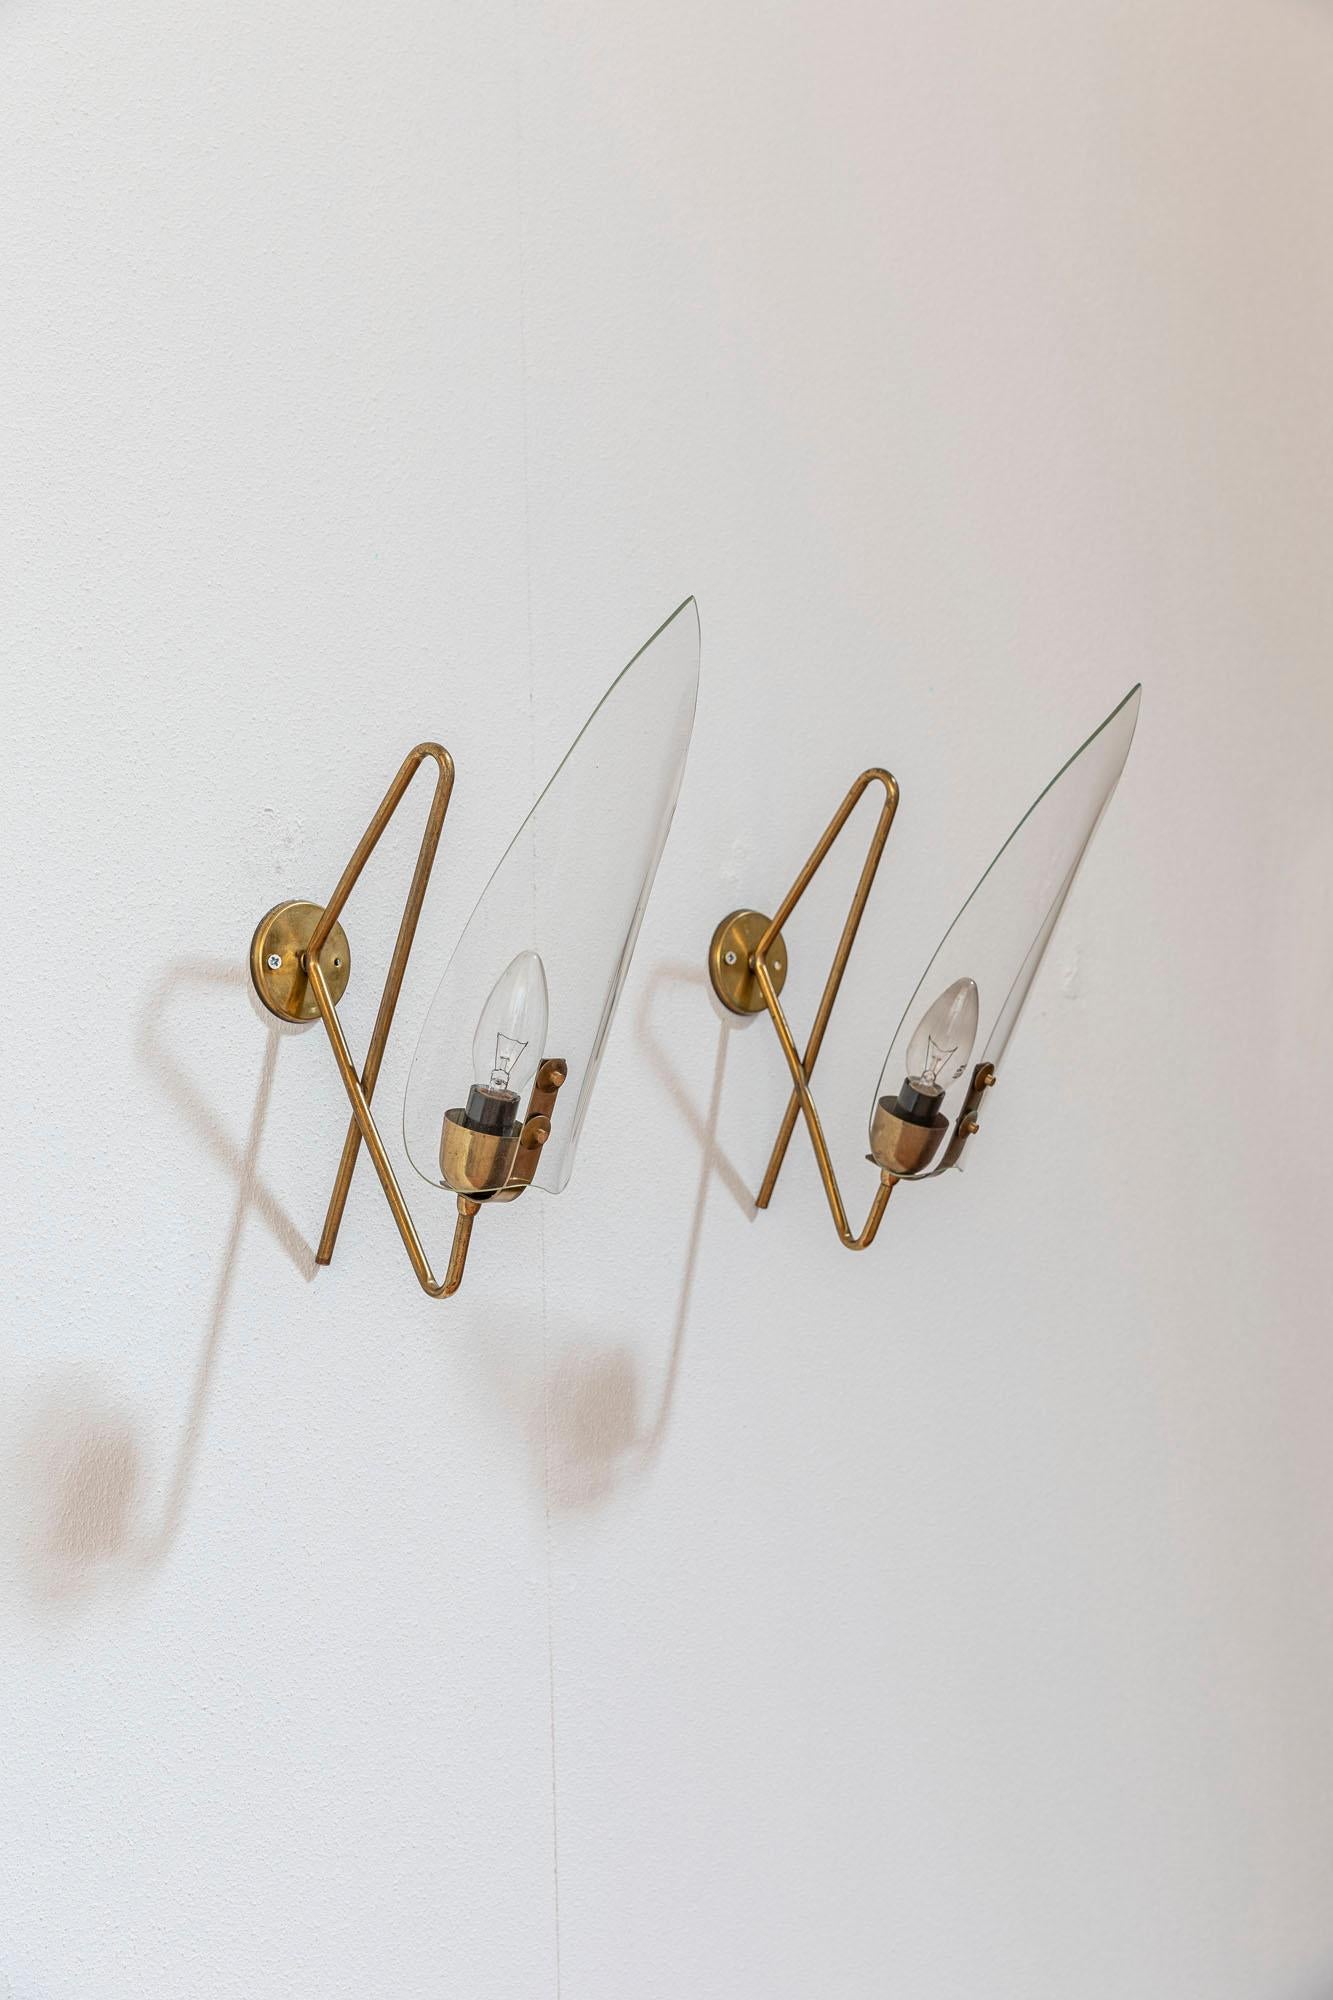 Geometrical brass structure and clear shade for an elegant and classy pair of wall lights.